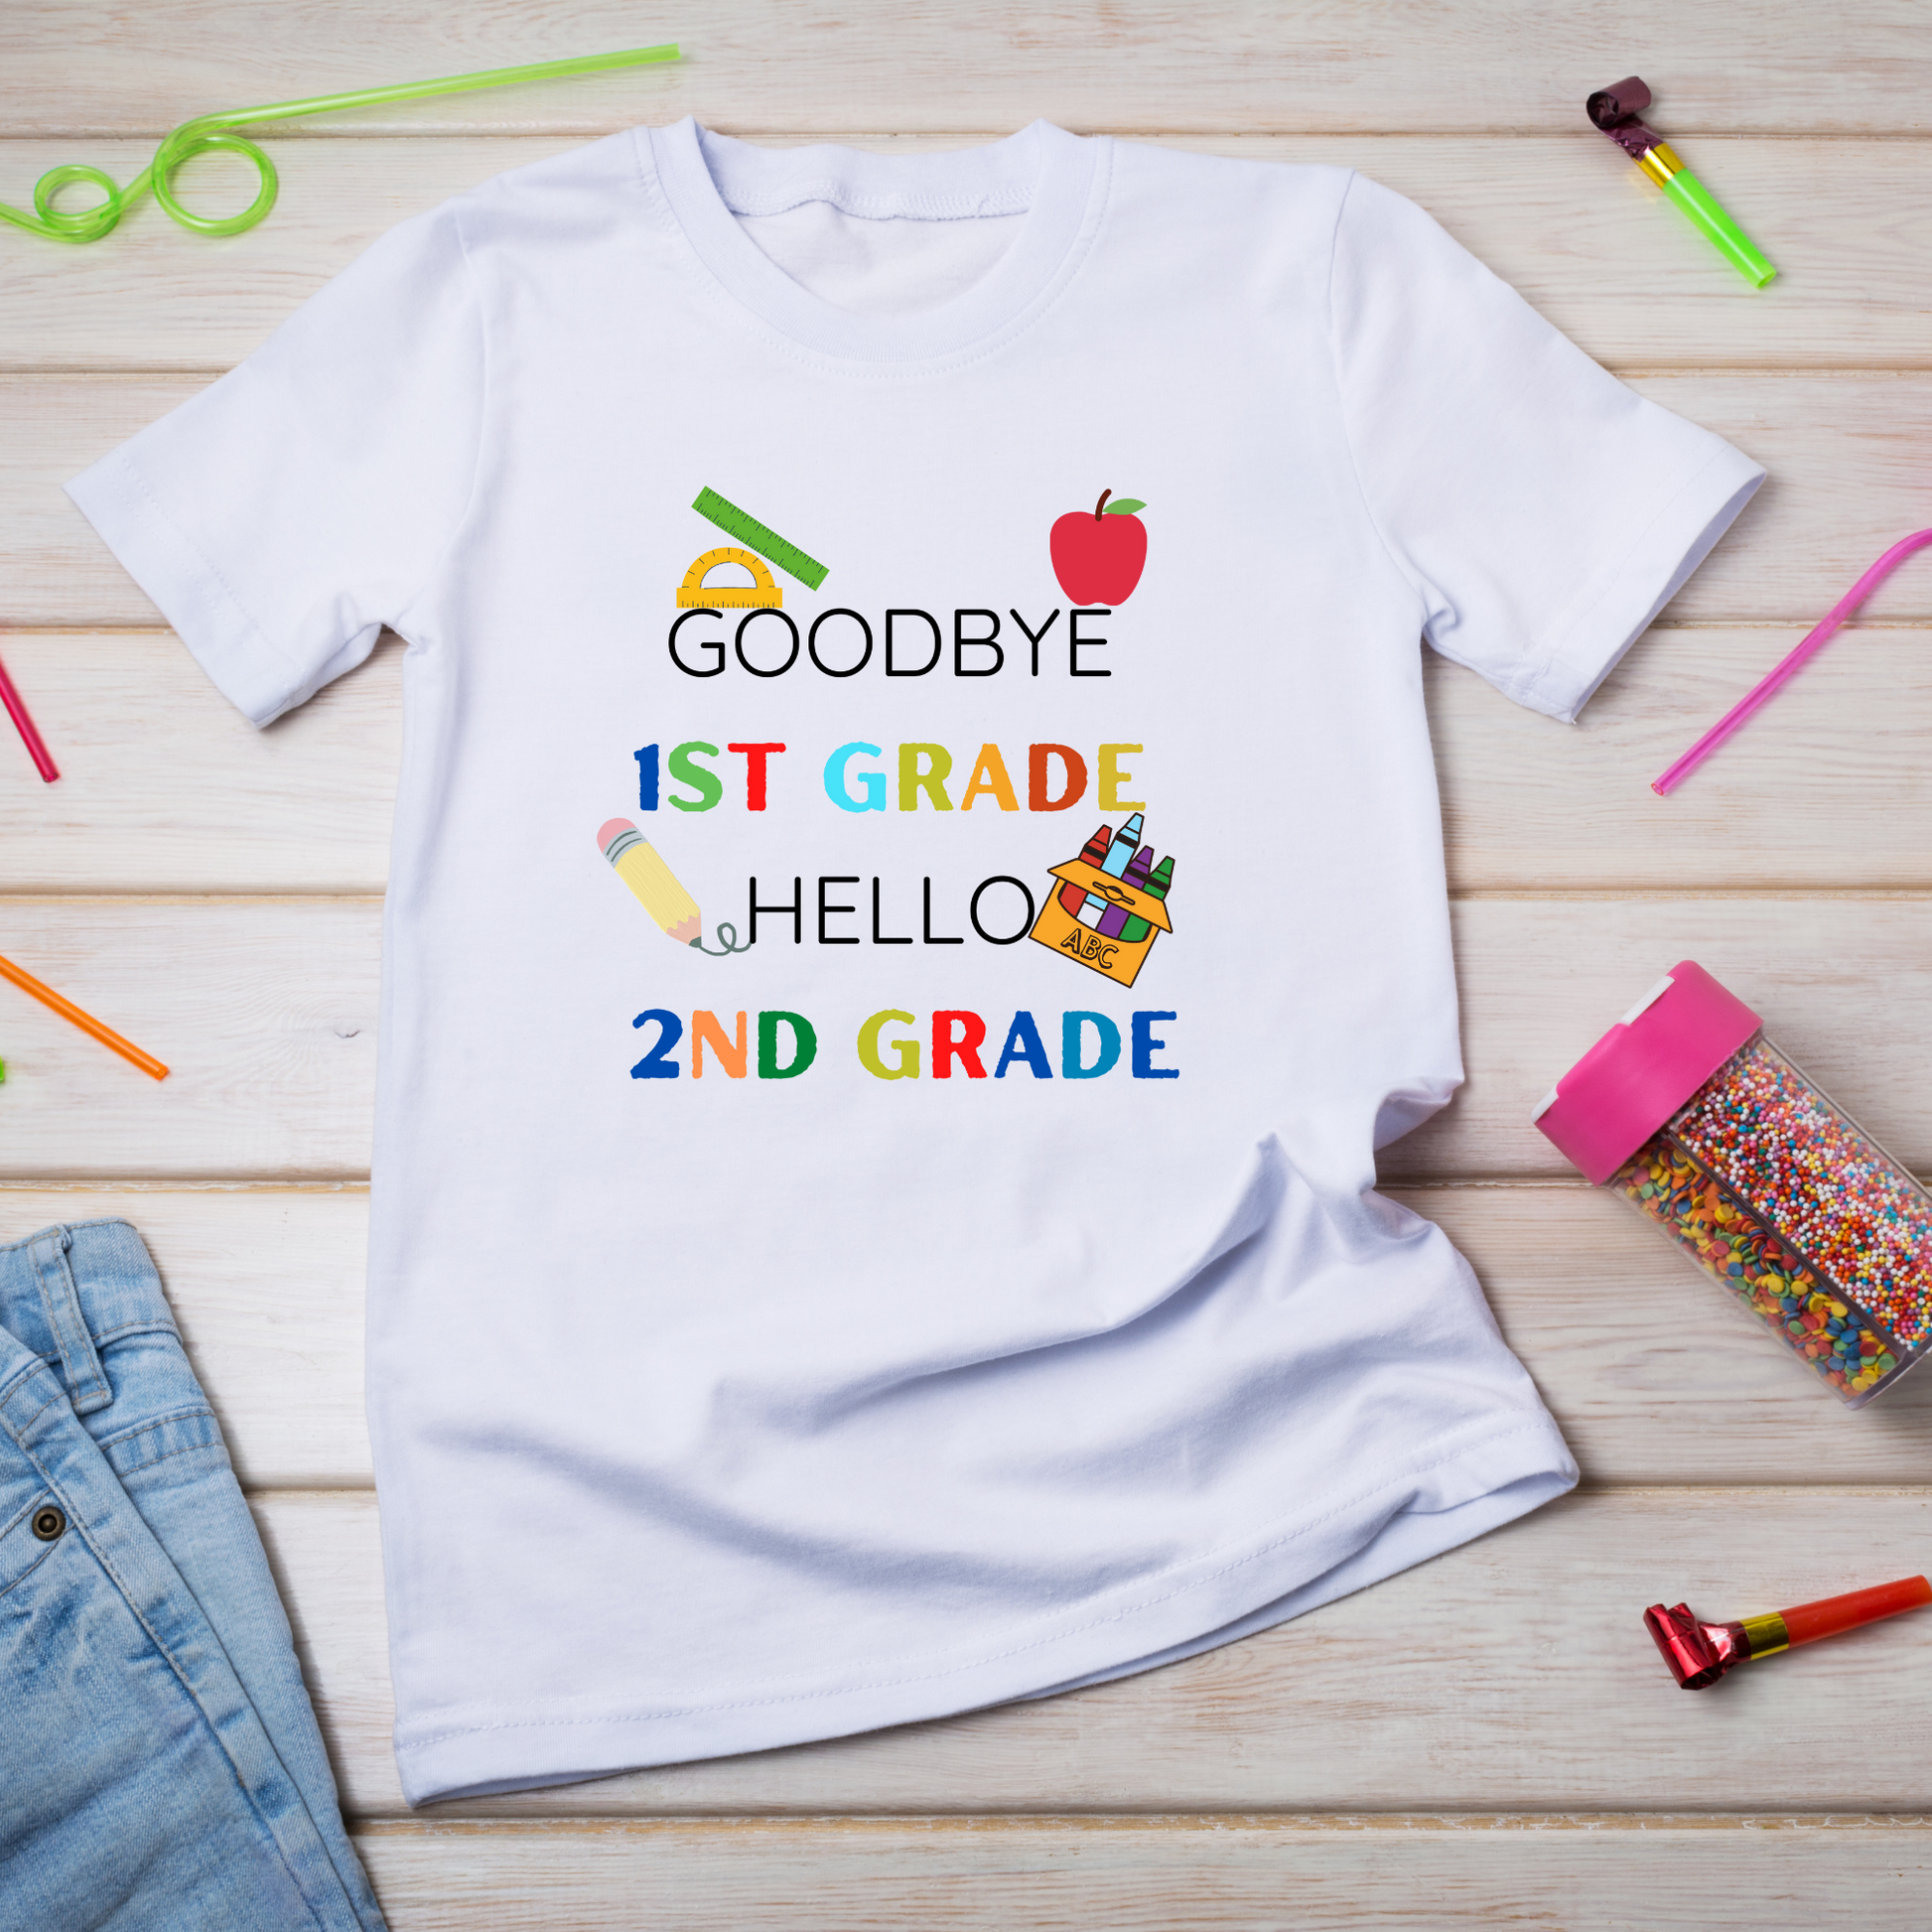 First Day of School T-shirt